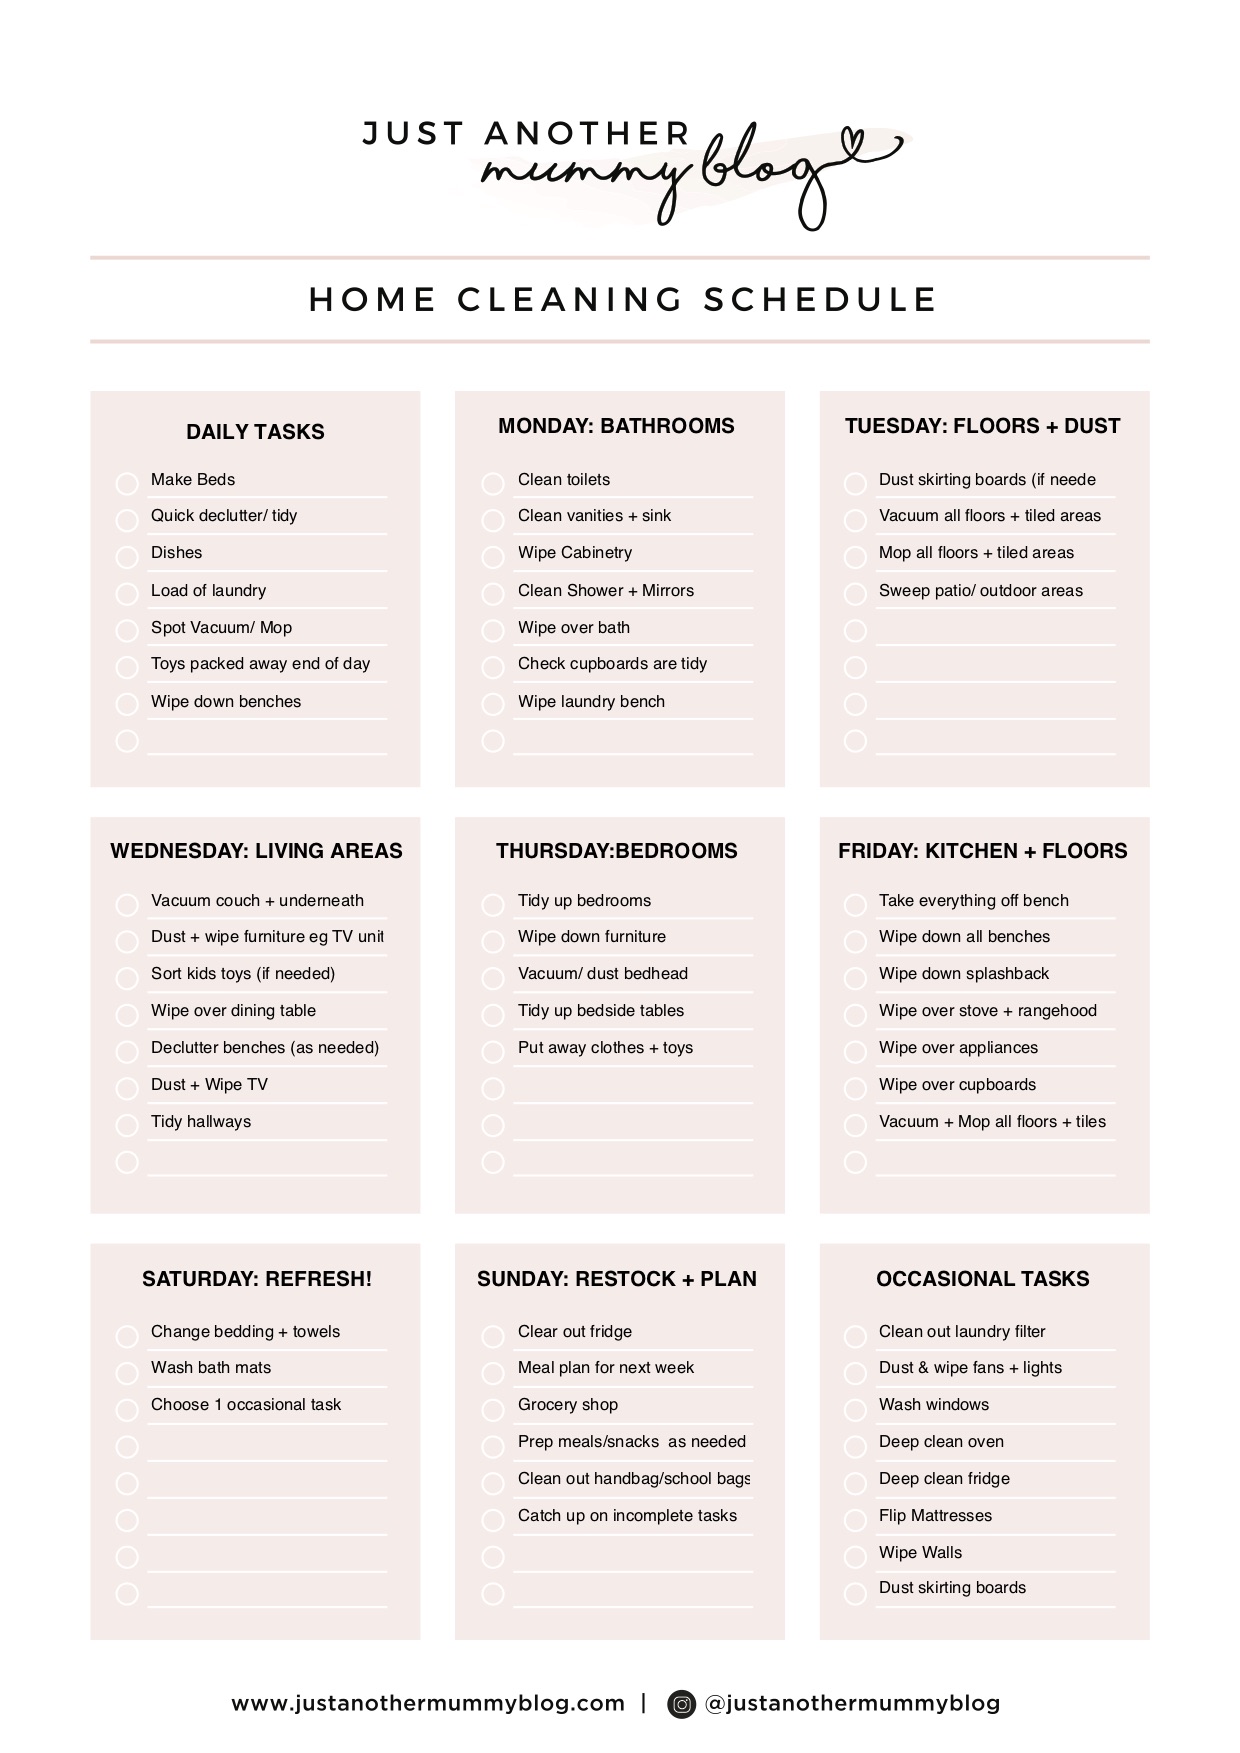 Come Clean - Free Cleaning Calendar for April 2016 - Clean Mama